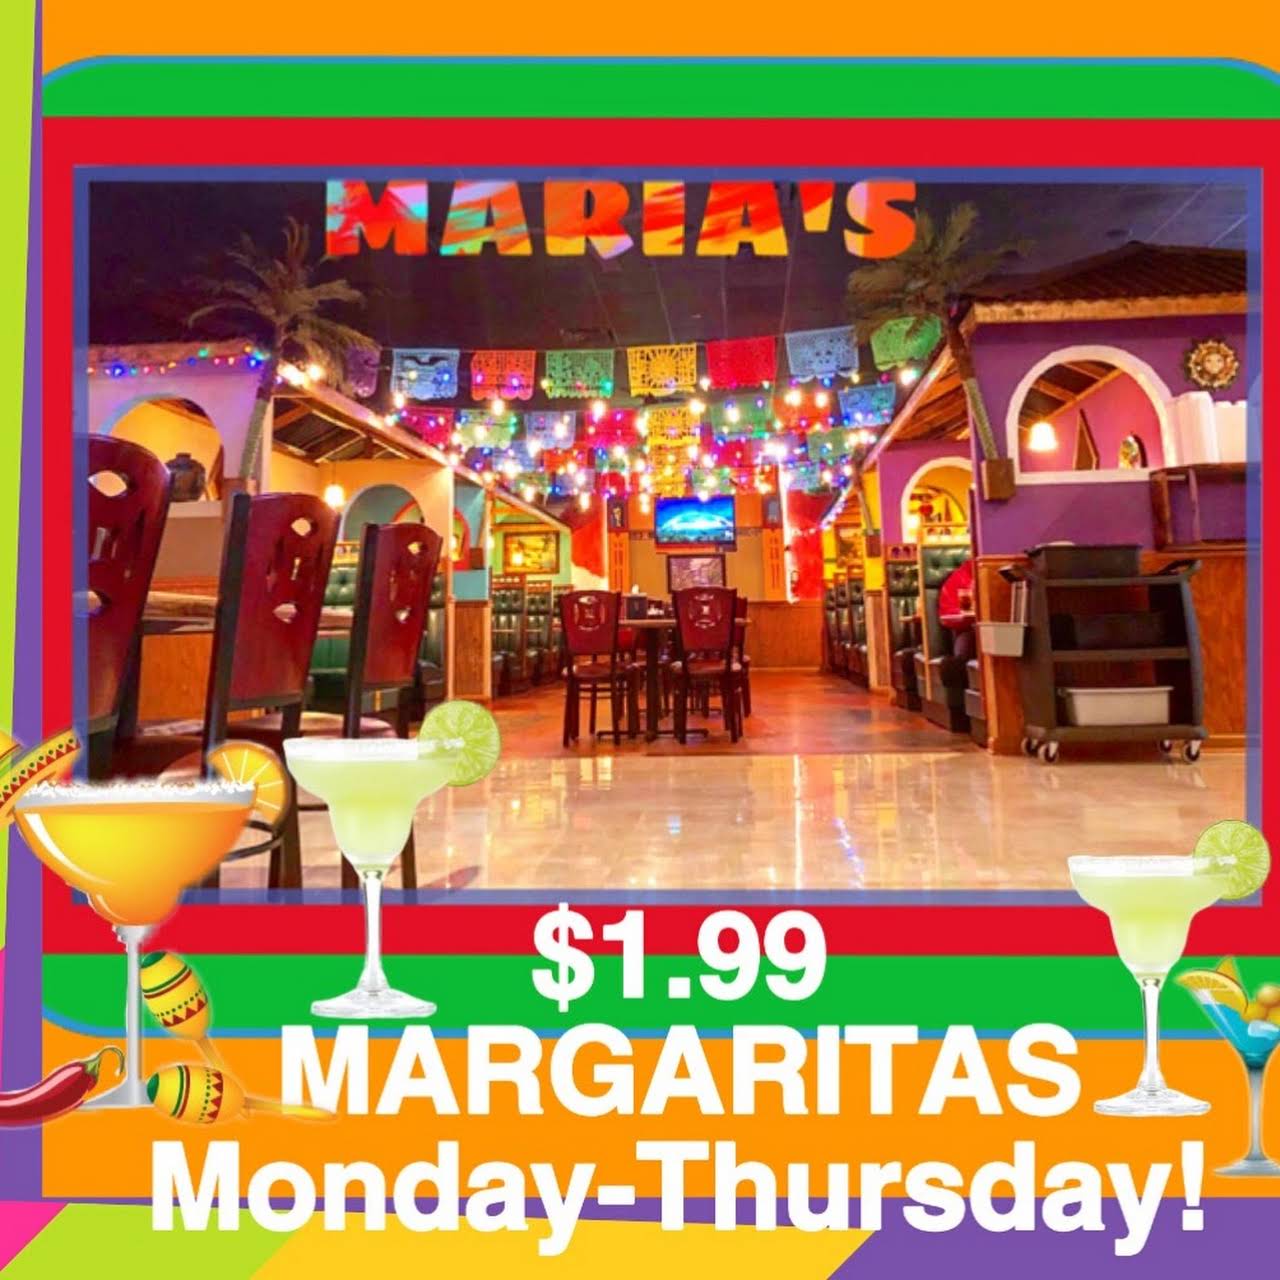 Maria S Mexican Restaurant Come And Enjoy Our Delicious Comida Great Service And Amazing